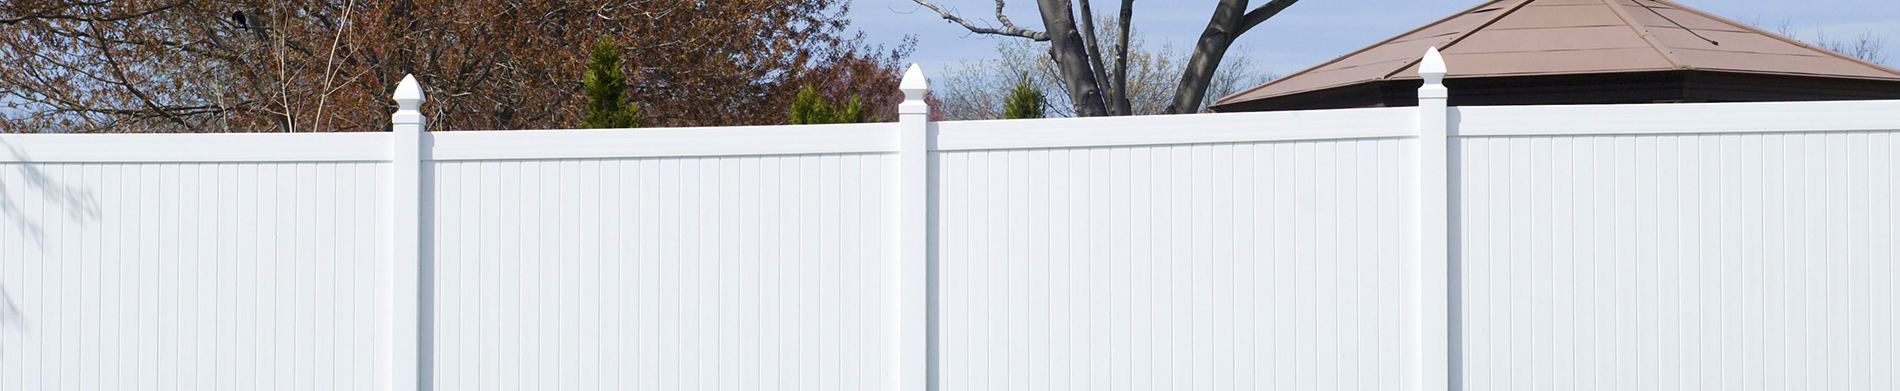 Things You Can Customize in Vinyl Fences